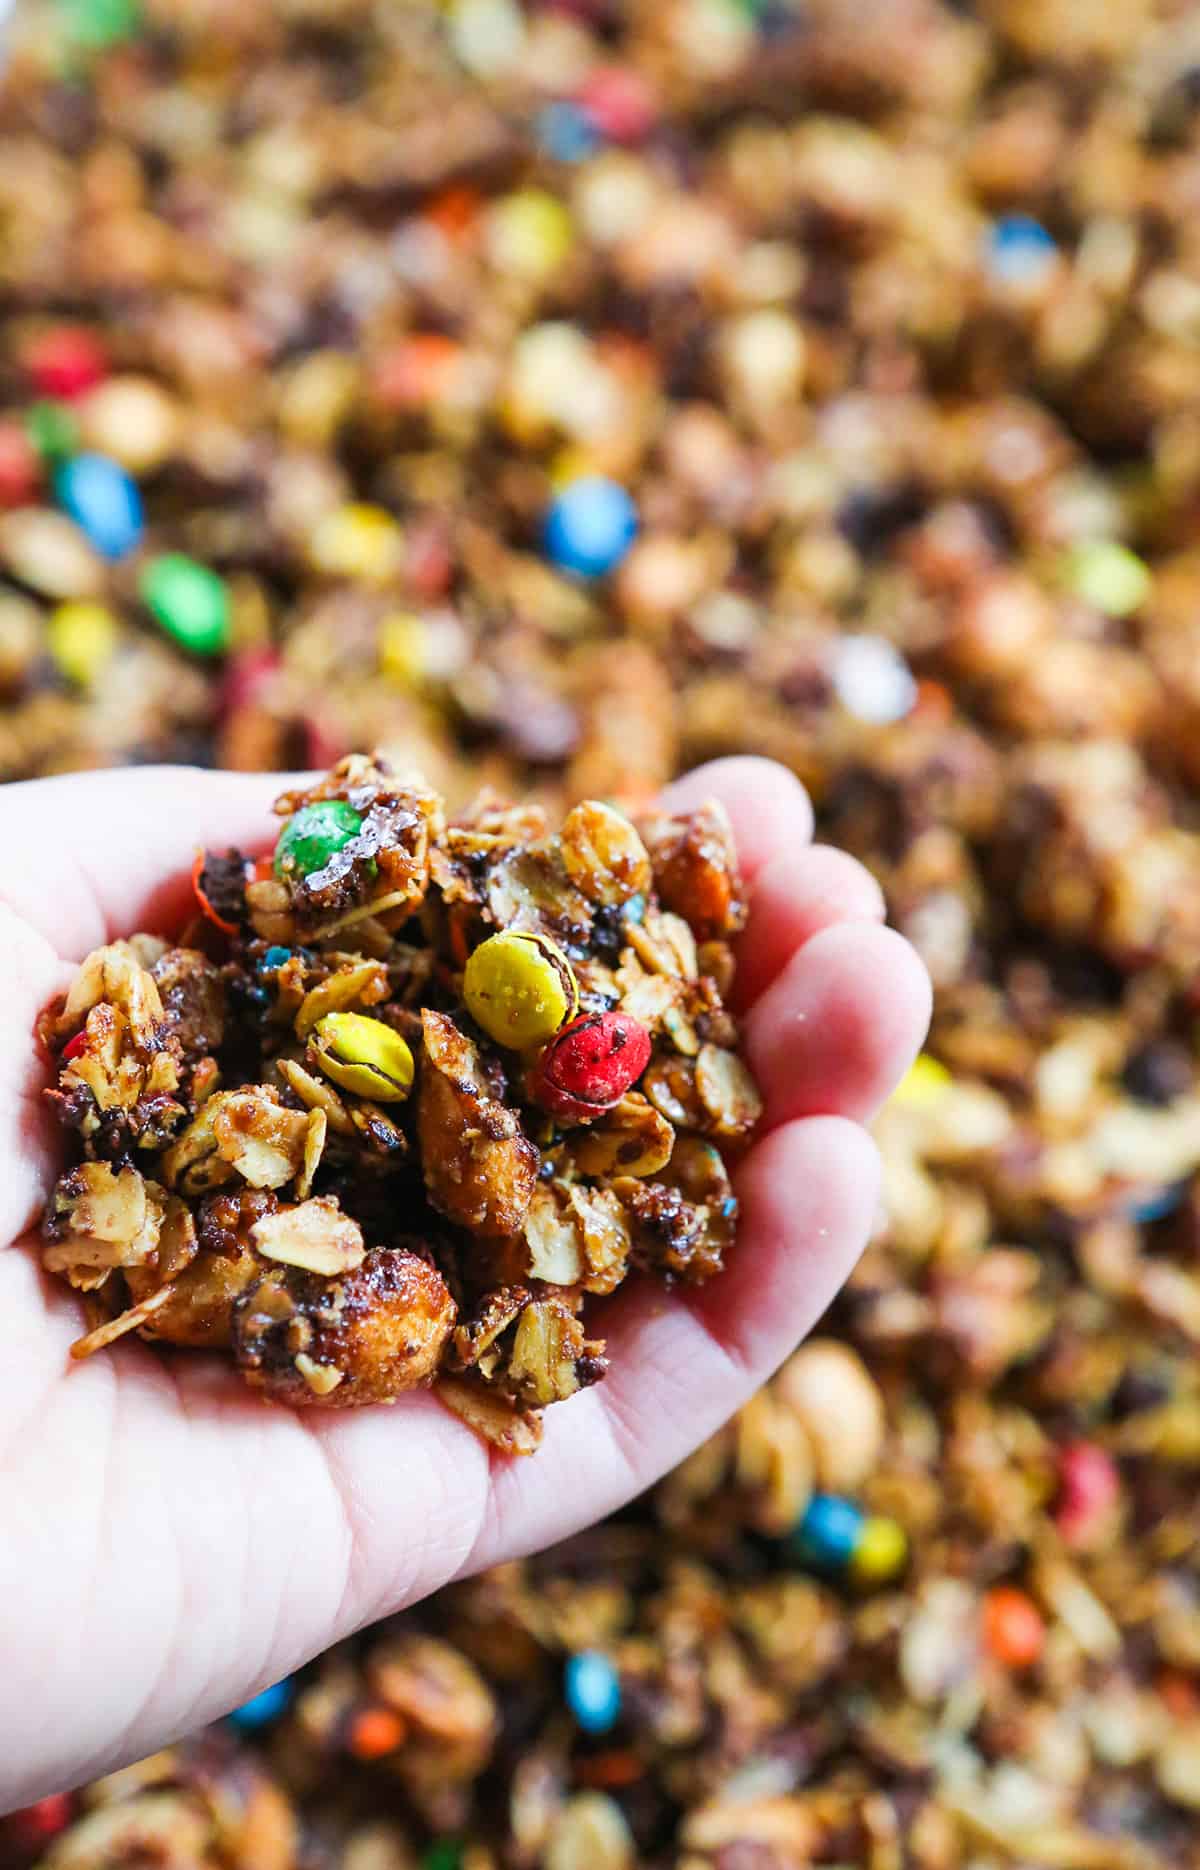 Hand filled with granola.